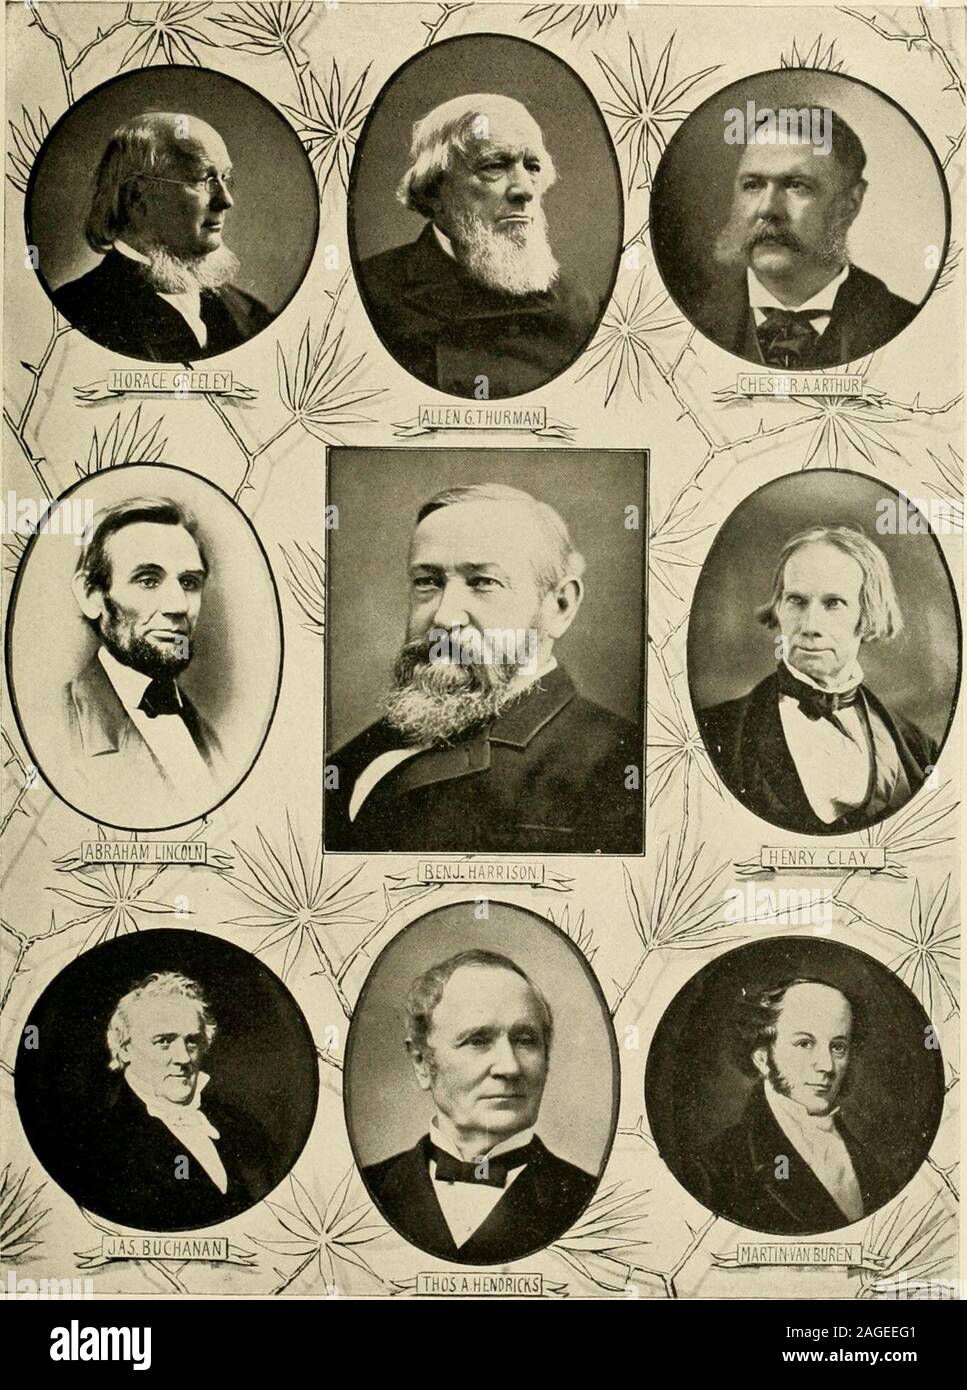 . Progressive men and women of Kosciusko County, Indiana : to which is appended a comprehensive compendium of national biography ... eralgovernment, and as the capture of NewOrleans had been resolved upon, Farragutwas chosen to command the expedition.His force consisted of the West Gulf block-ading squadron and Porters mortar flotilla.In January, 1862, he hoisted his pennant atthe mizzen peak of the Hartford atHampton roads, set sail from thence on the3rd of February and reached Ship Island onthe 20th of the same month. A council ofwar was held on the 20th of April, in whichit was decided that Stock Photo